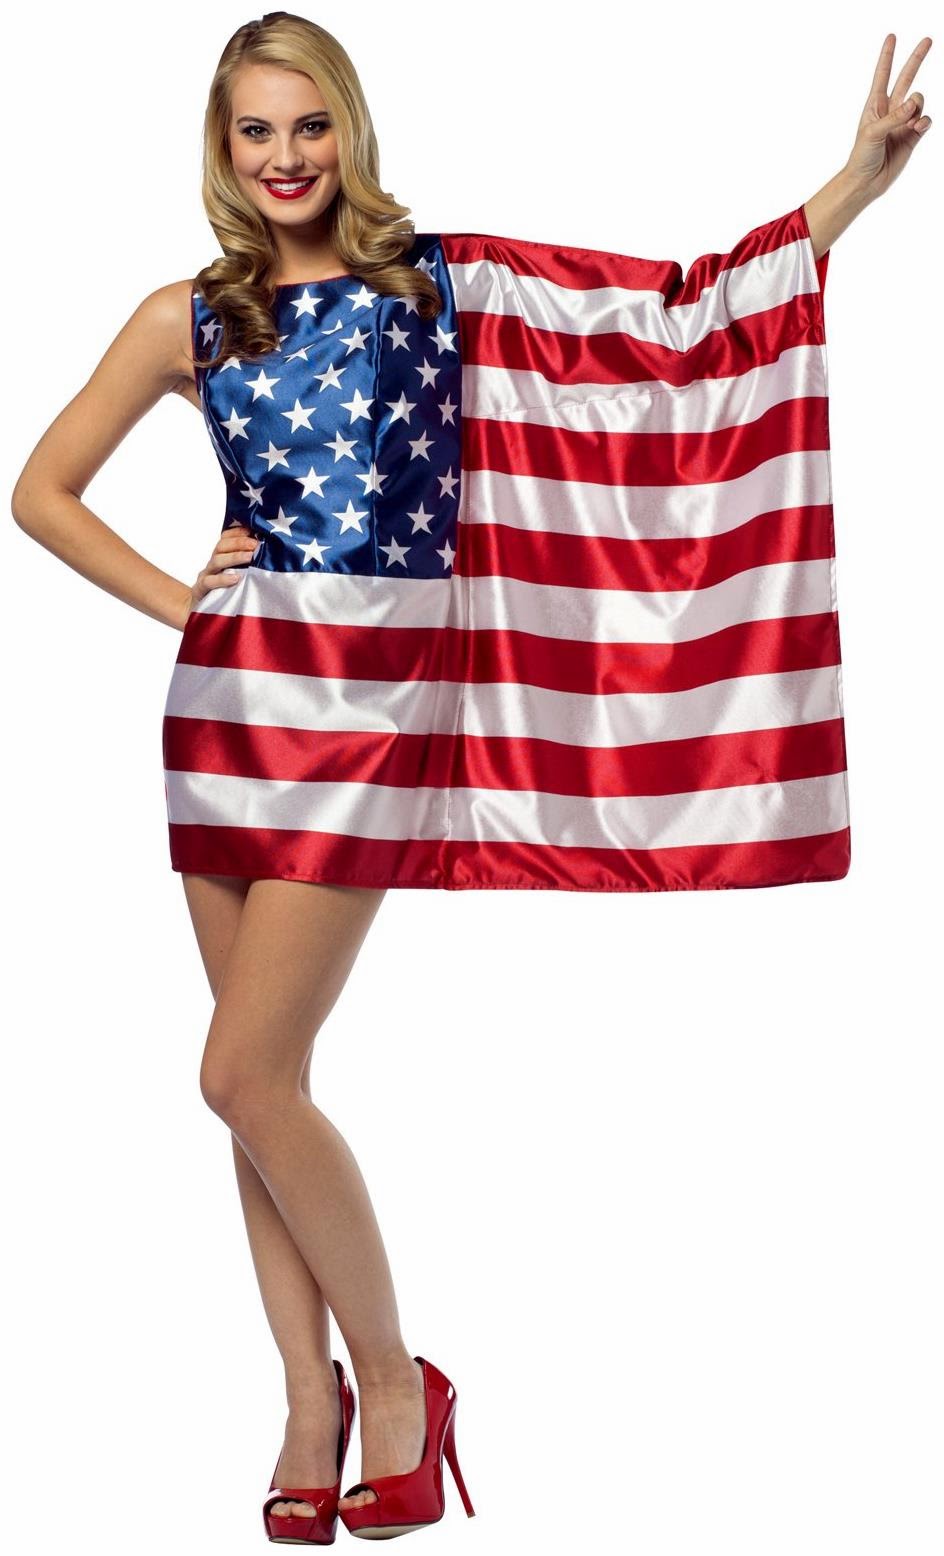 Independence Day Costumes: Cute Outfit Ideas for the Fourth of July